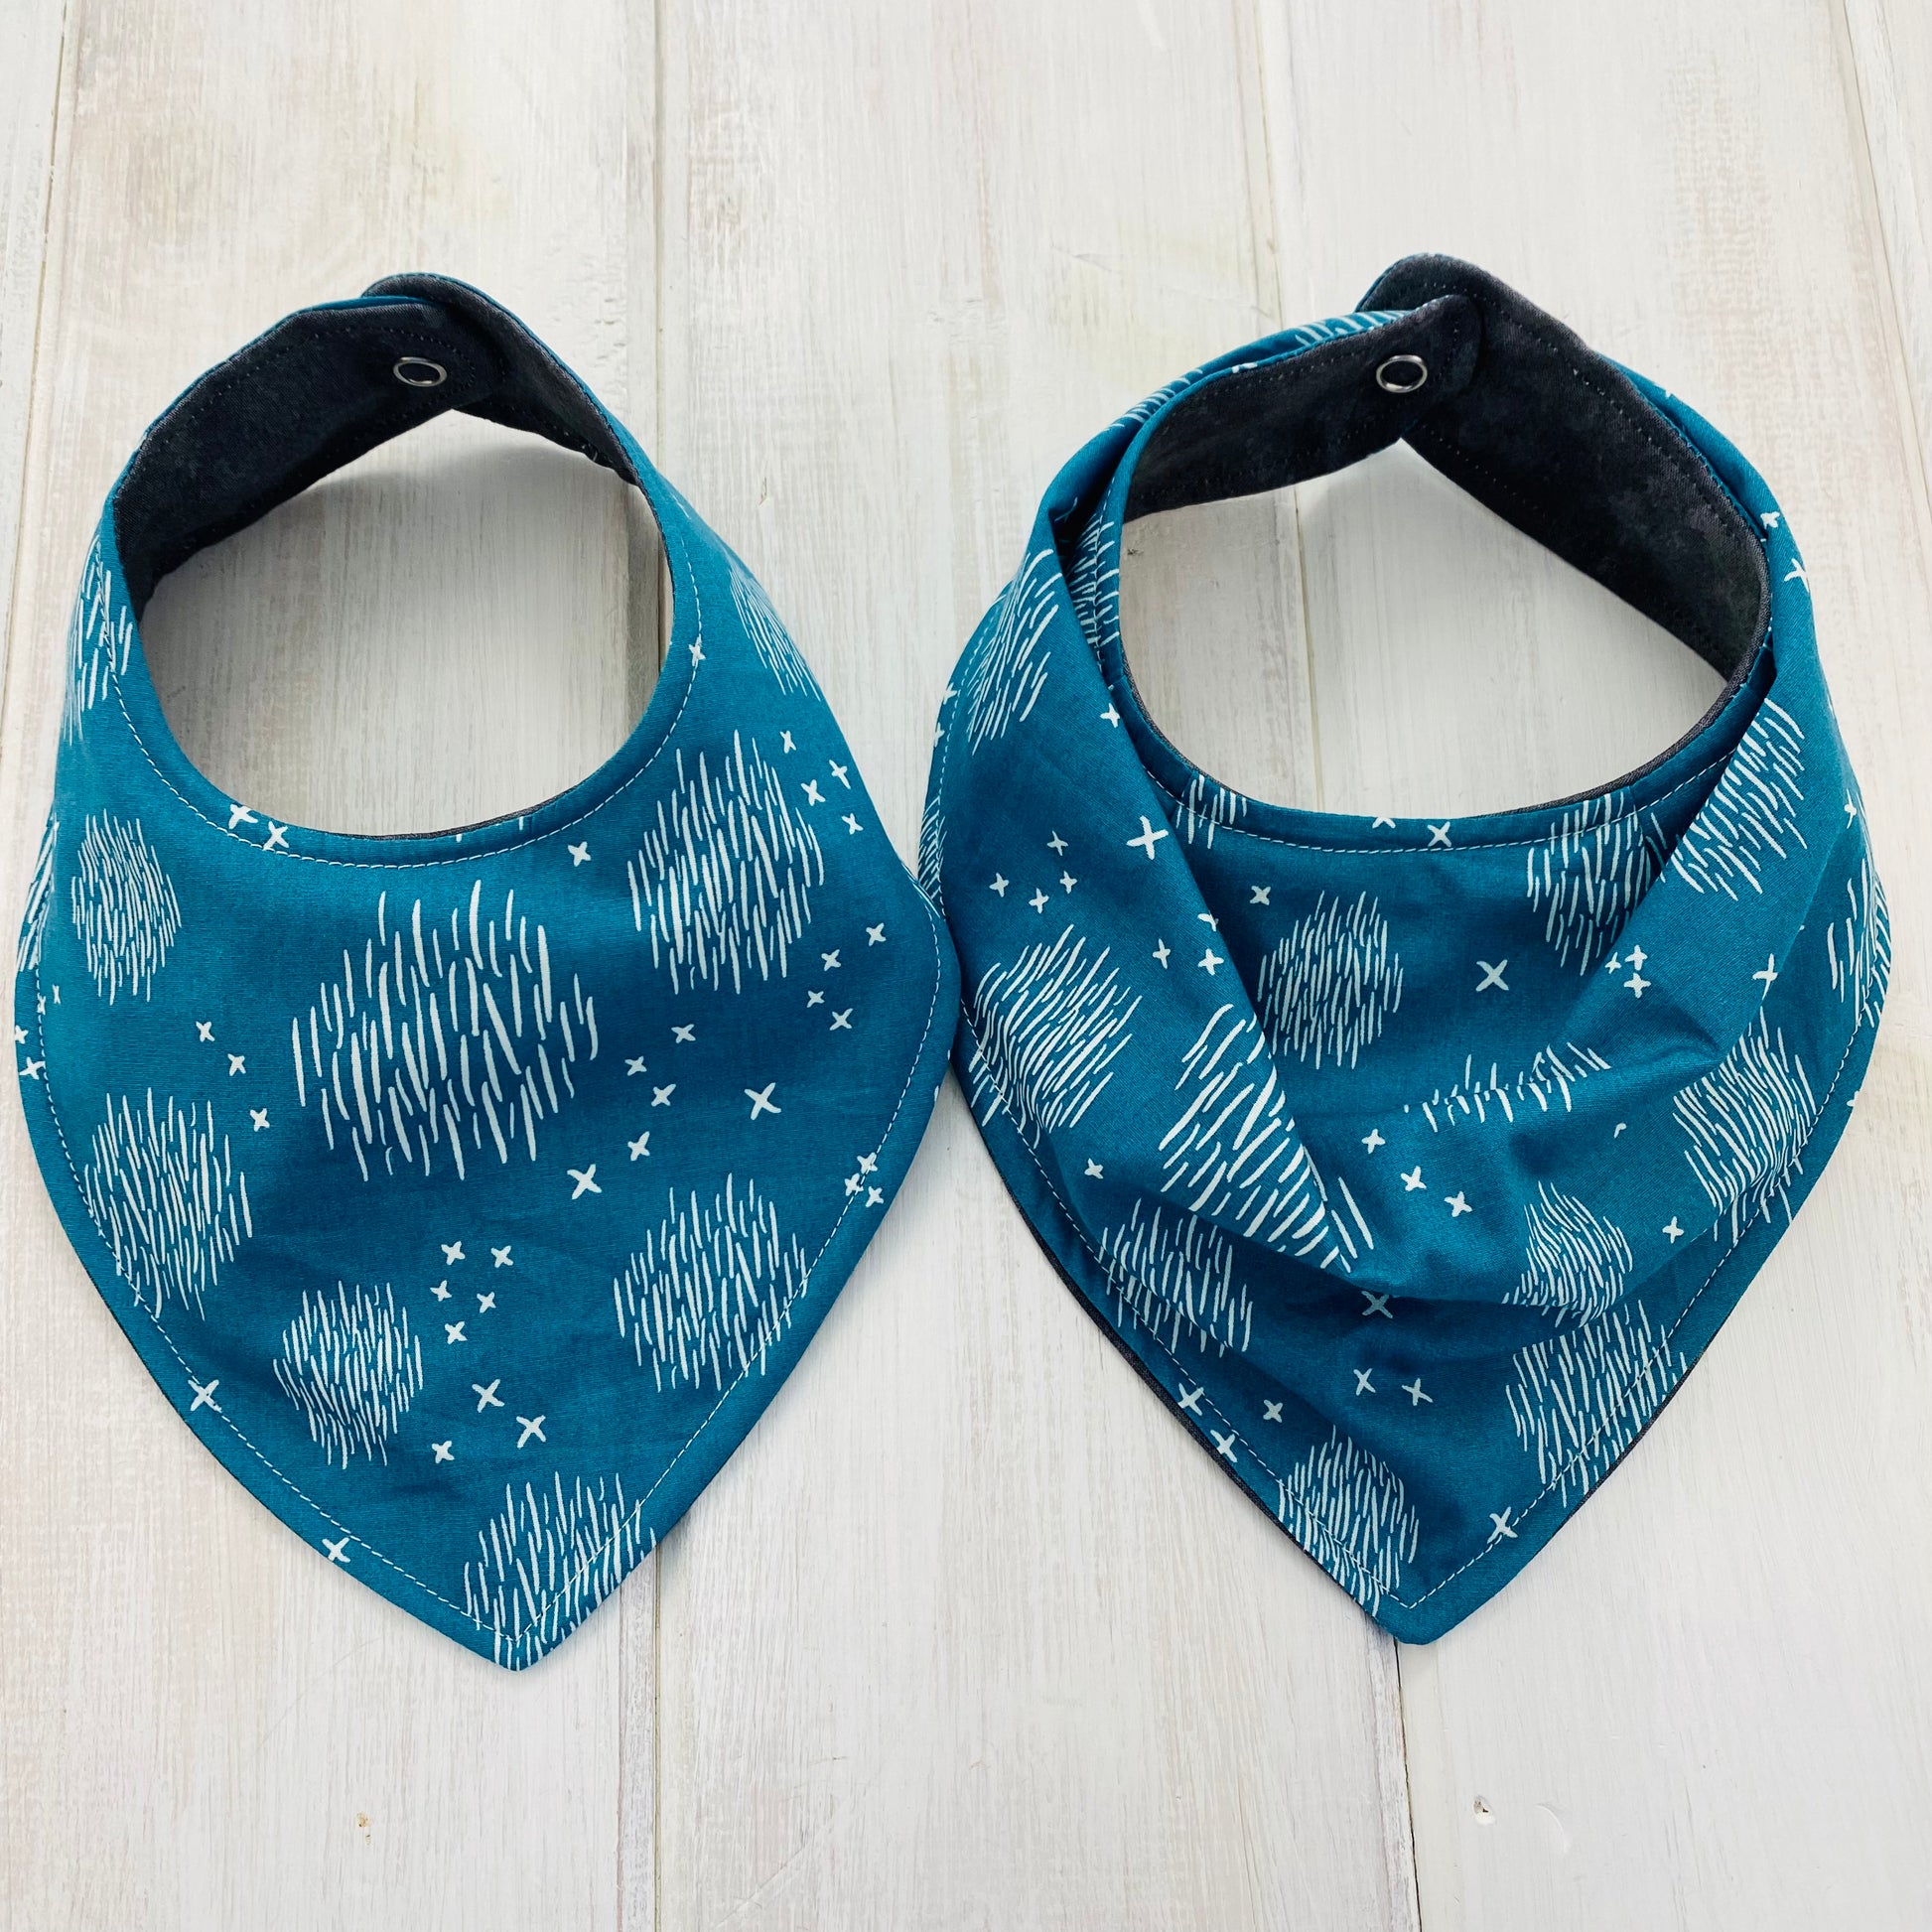 Bandana and smooth front baby bib show side by side.